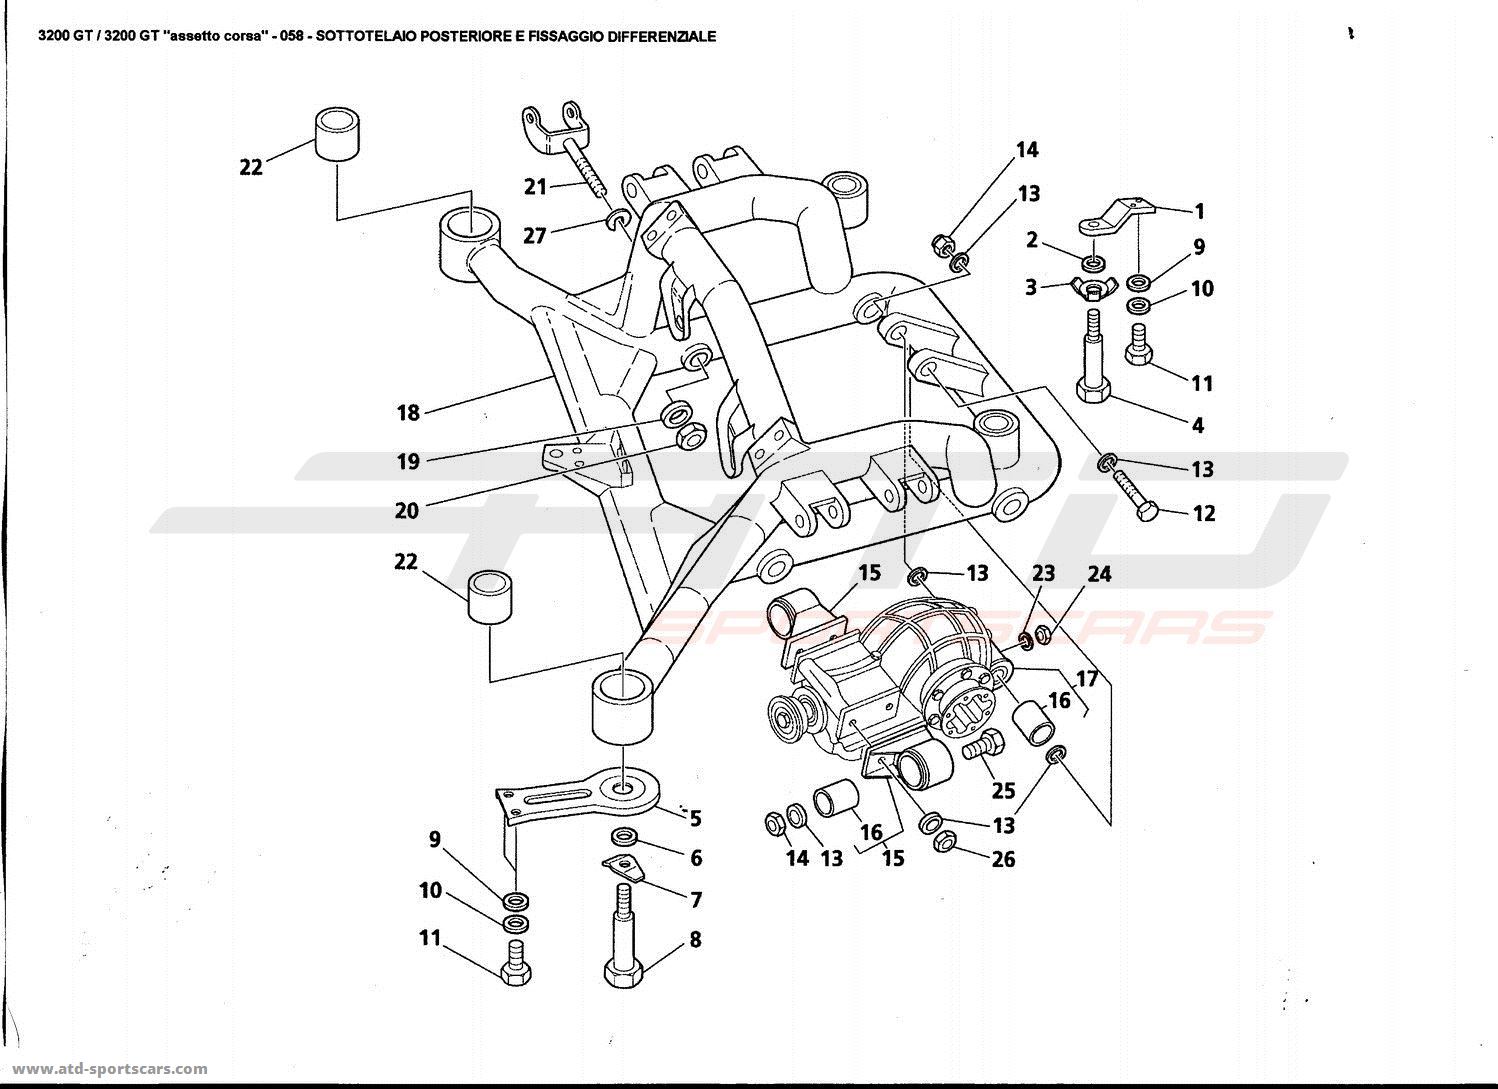 REAR UNDER-CHASSIS AND DIFFERENTIAL FASTENING